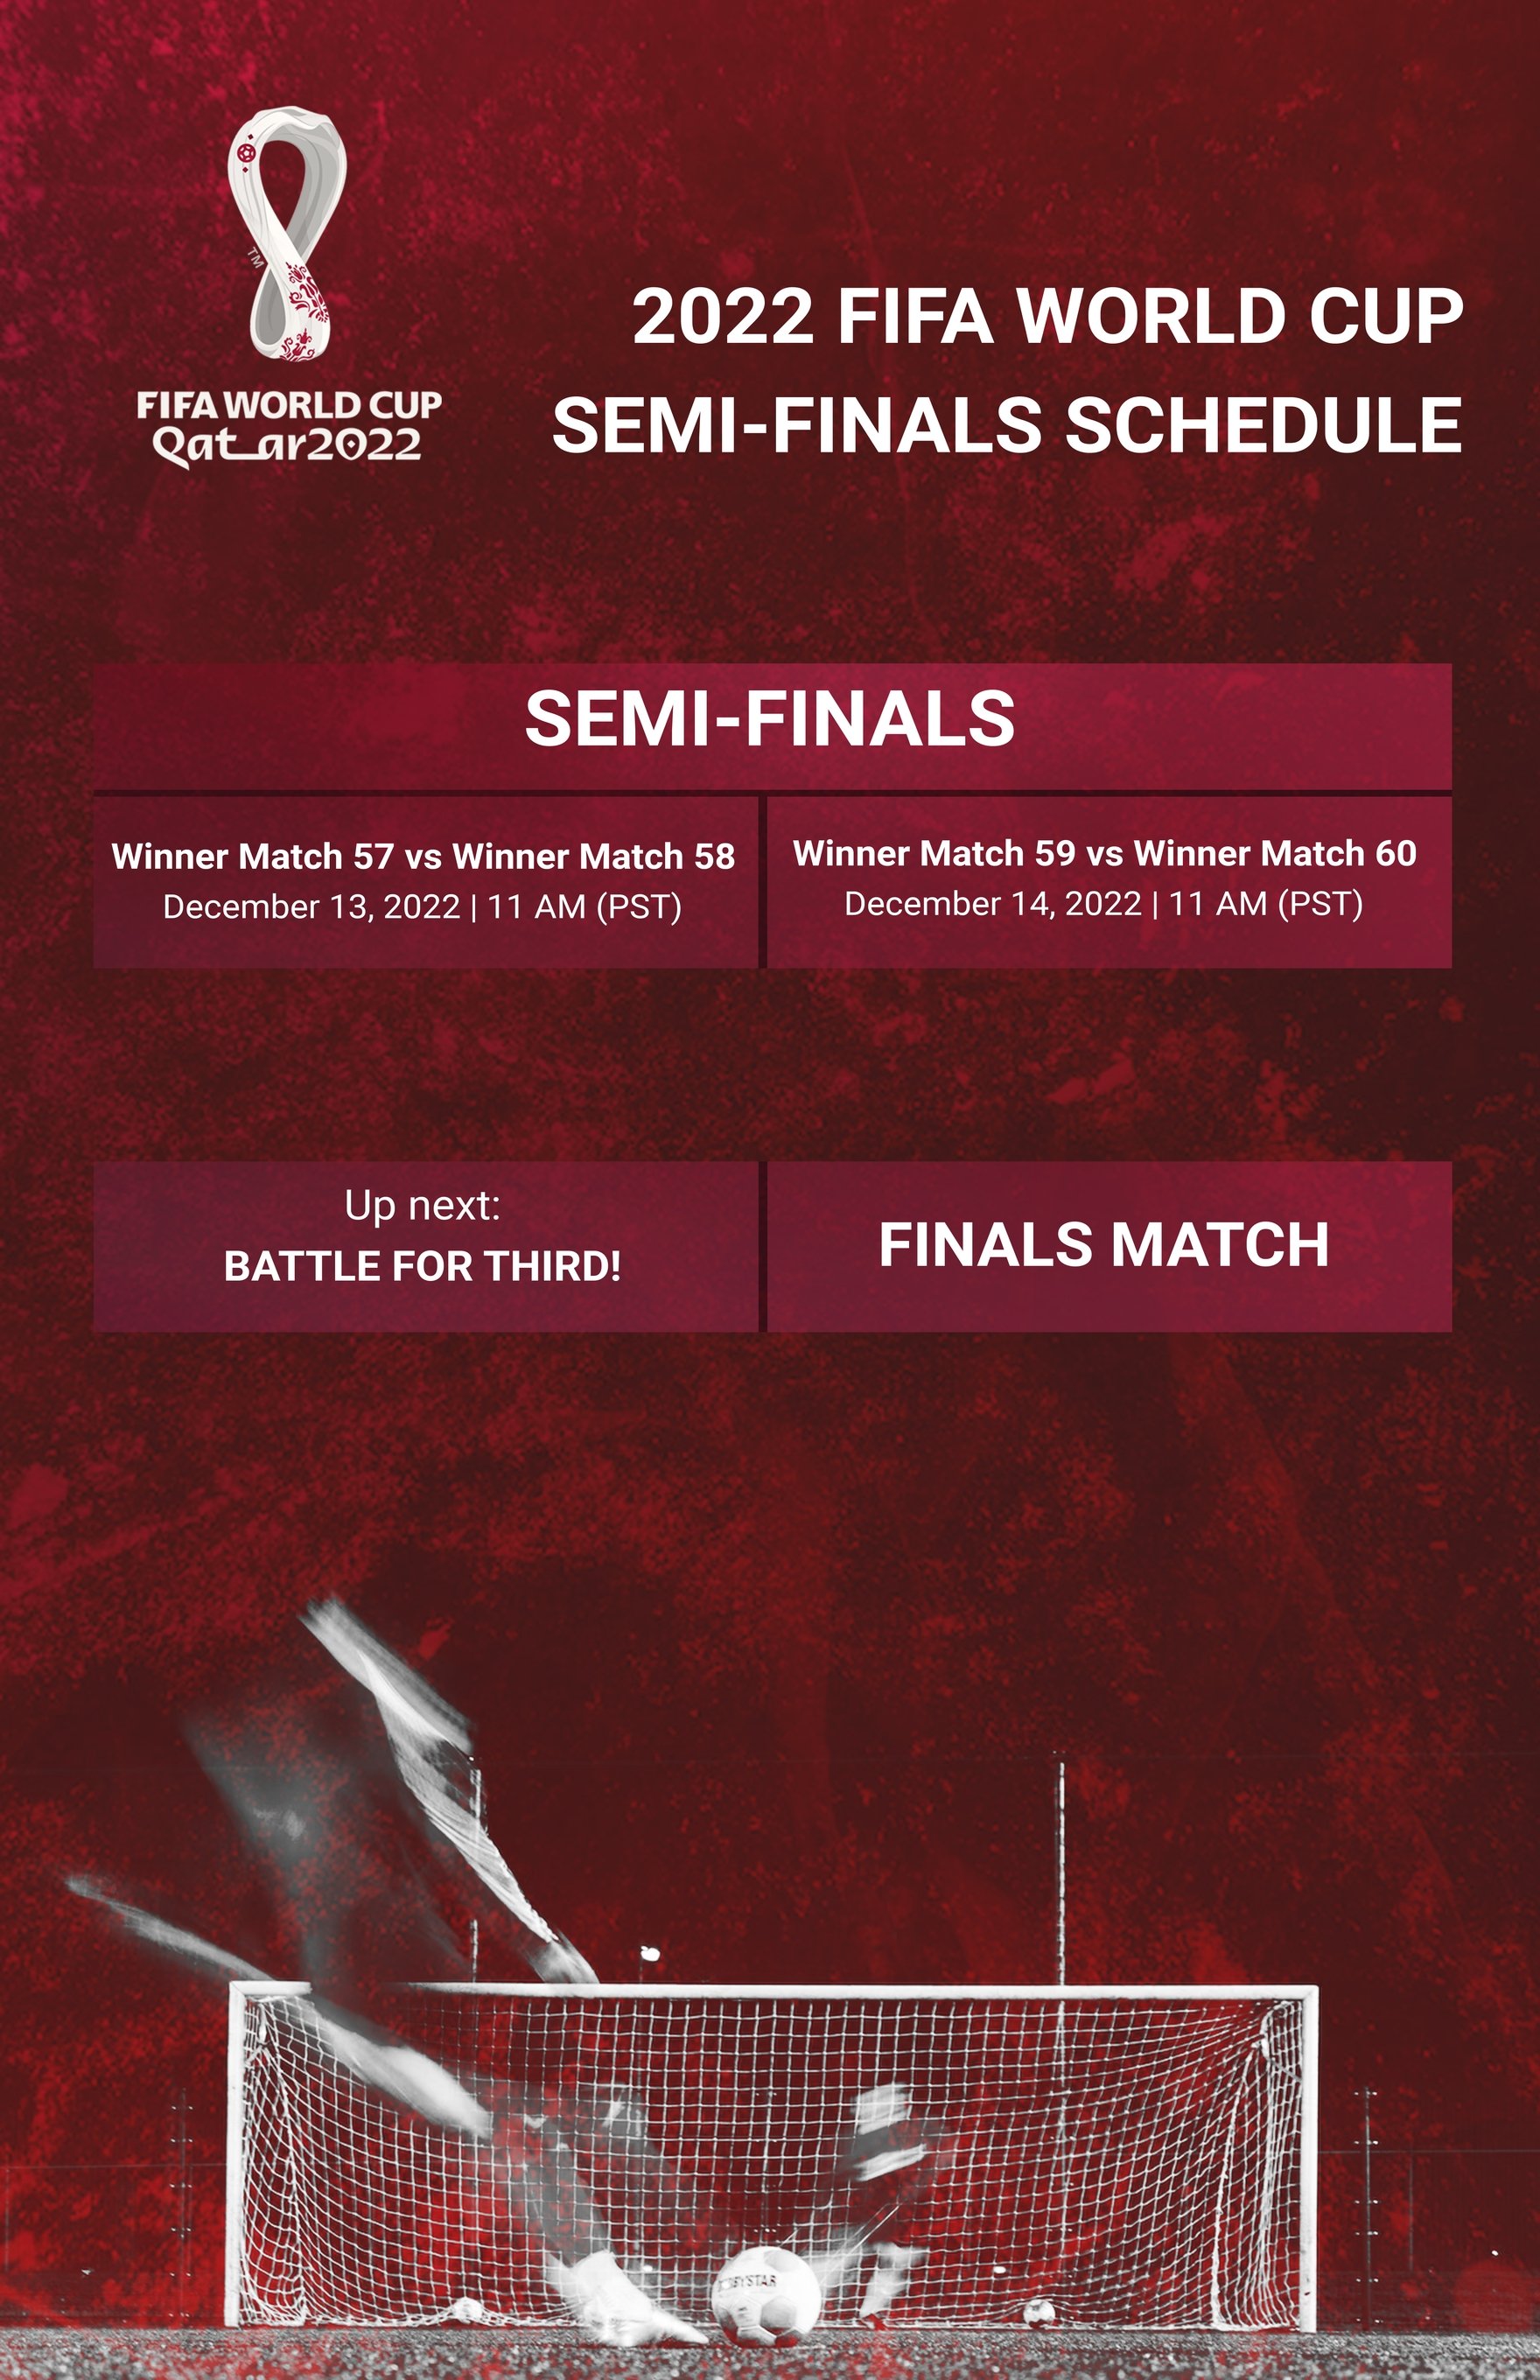 FIFA World Cup 2022 Semi-Finals Schedule Poster